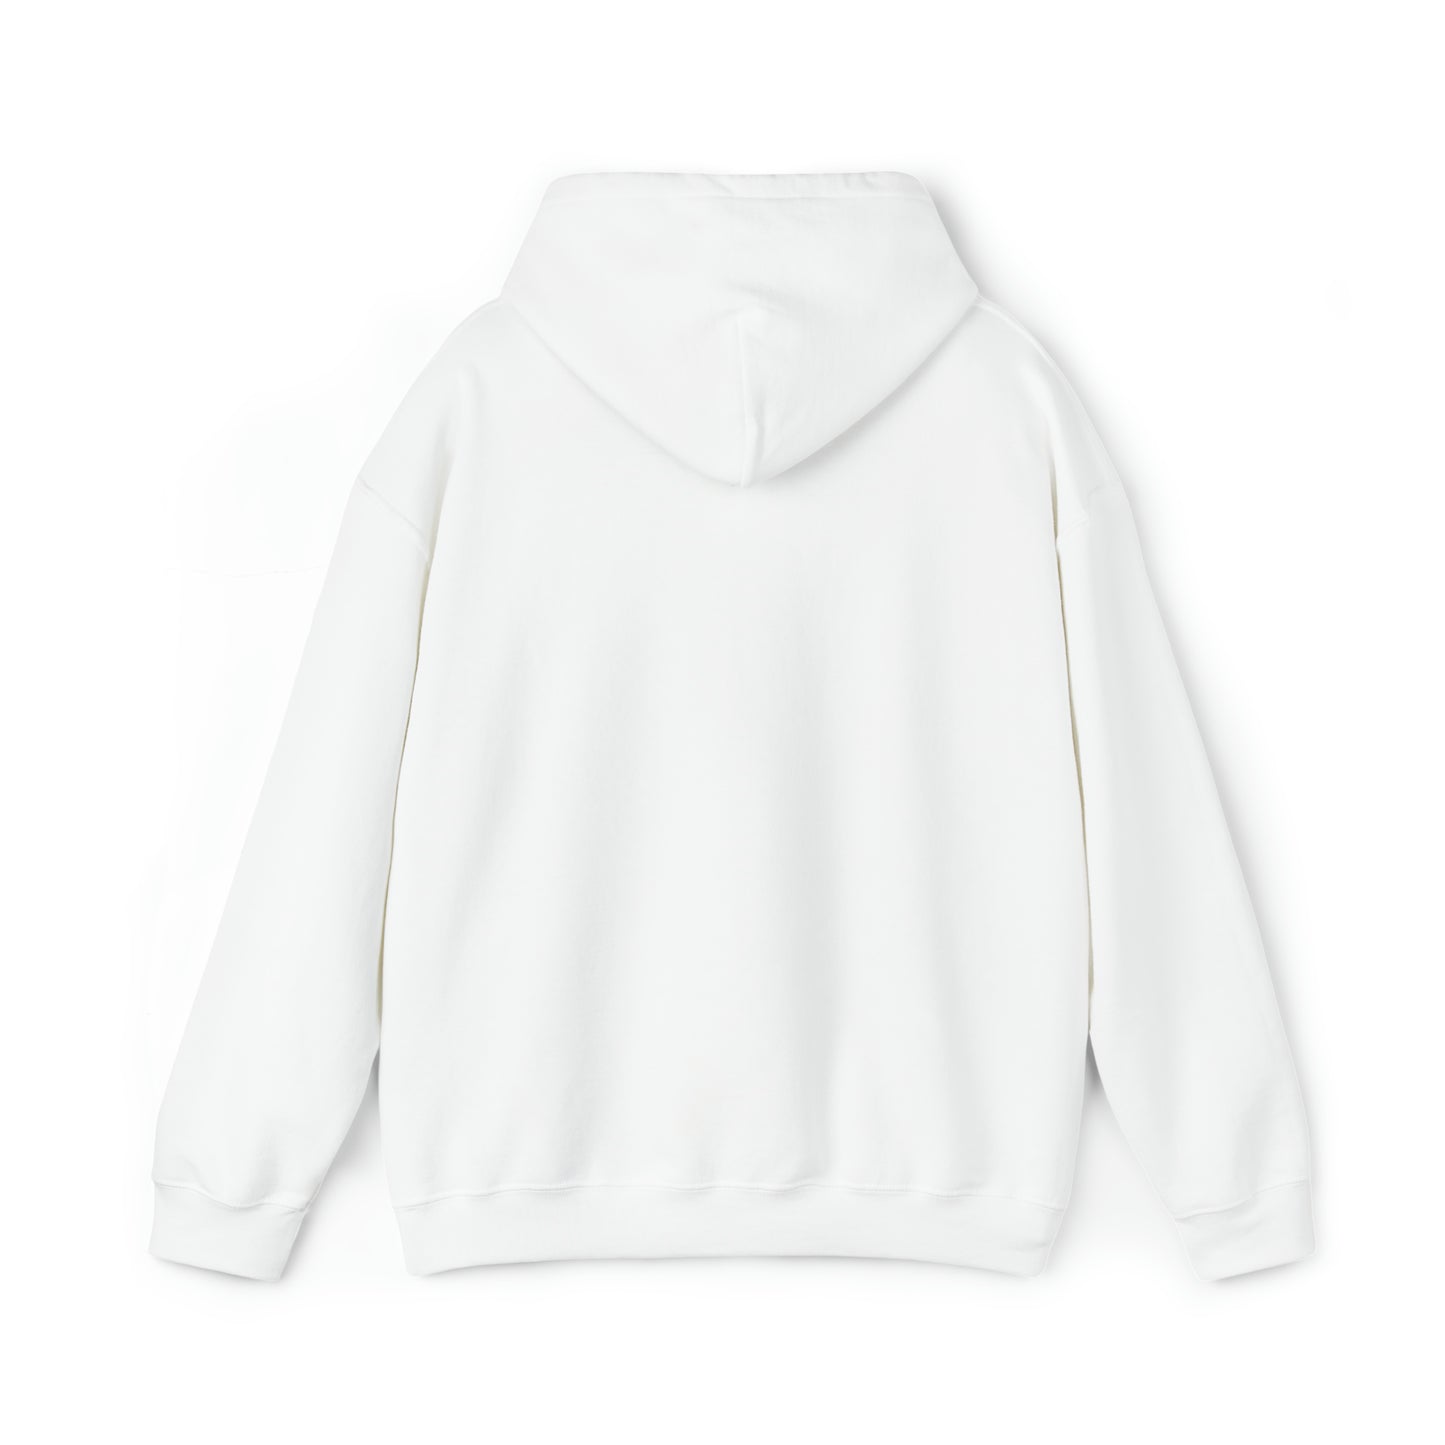 A plain white hoodie with the hood visible, displayed on a white background. The Unisex Heavy Blend™ Hooded Sweatshirt by Printify, featuring a small "Cabbagetown" logo on the hood, is viewed from the back and is laid out flat.